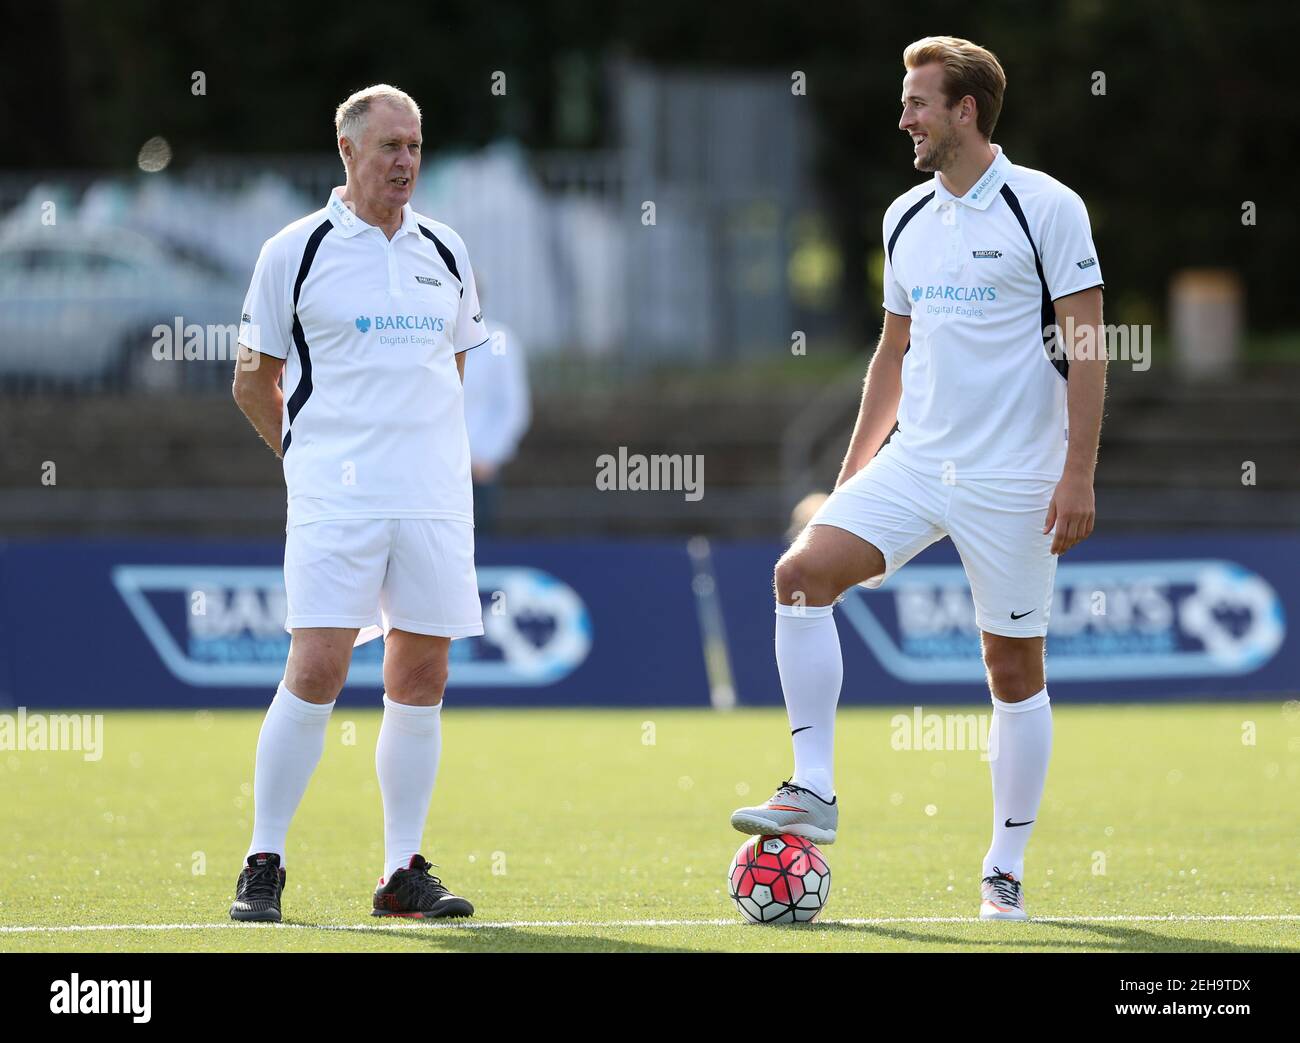 Football - Walking Football All Star Game - New River Sport & Fitness, White Hart Lane, Wood Green - 27/8/15 Harry Kane and Sir Geoff Hurst take part in an all-star walking football fixture staged by Barclays digital eagles to help community volunteer Steve rich promote the game nationwide Mandatory Credit: Action Images / Alex Morton Livepic EDITORIAL USE ONLY. Stock Photo